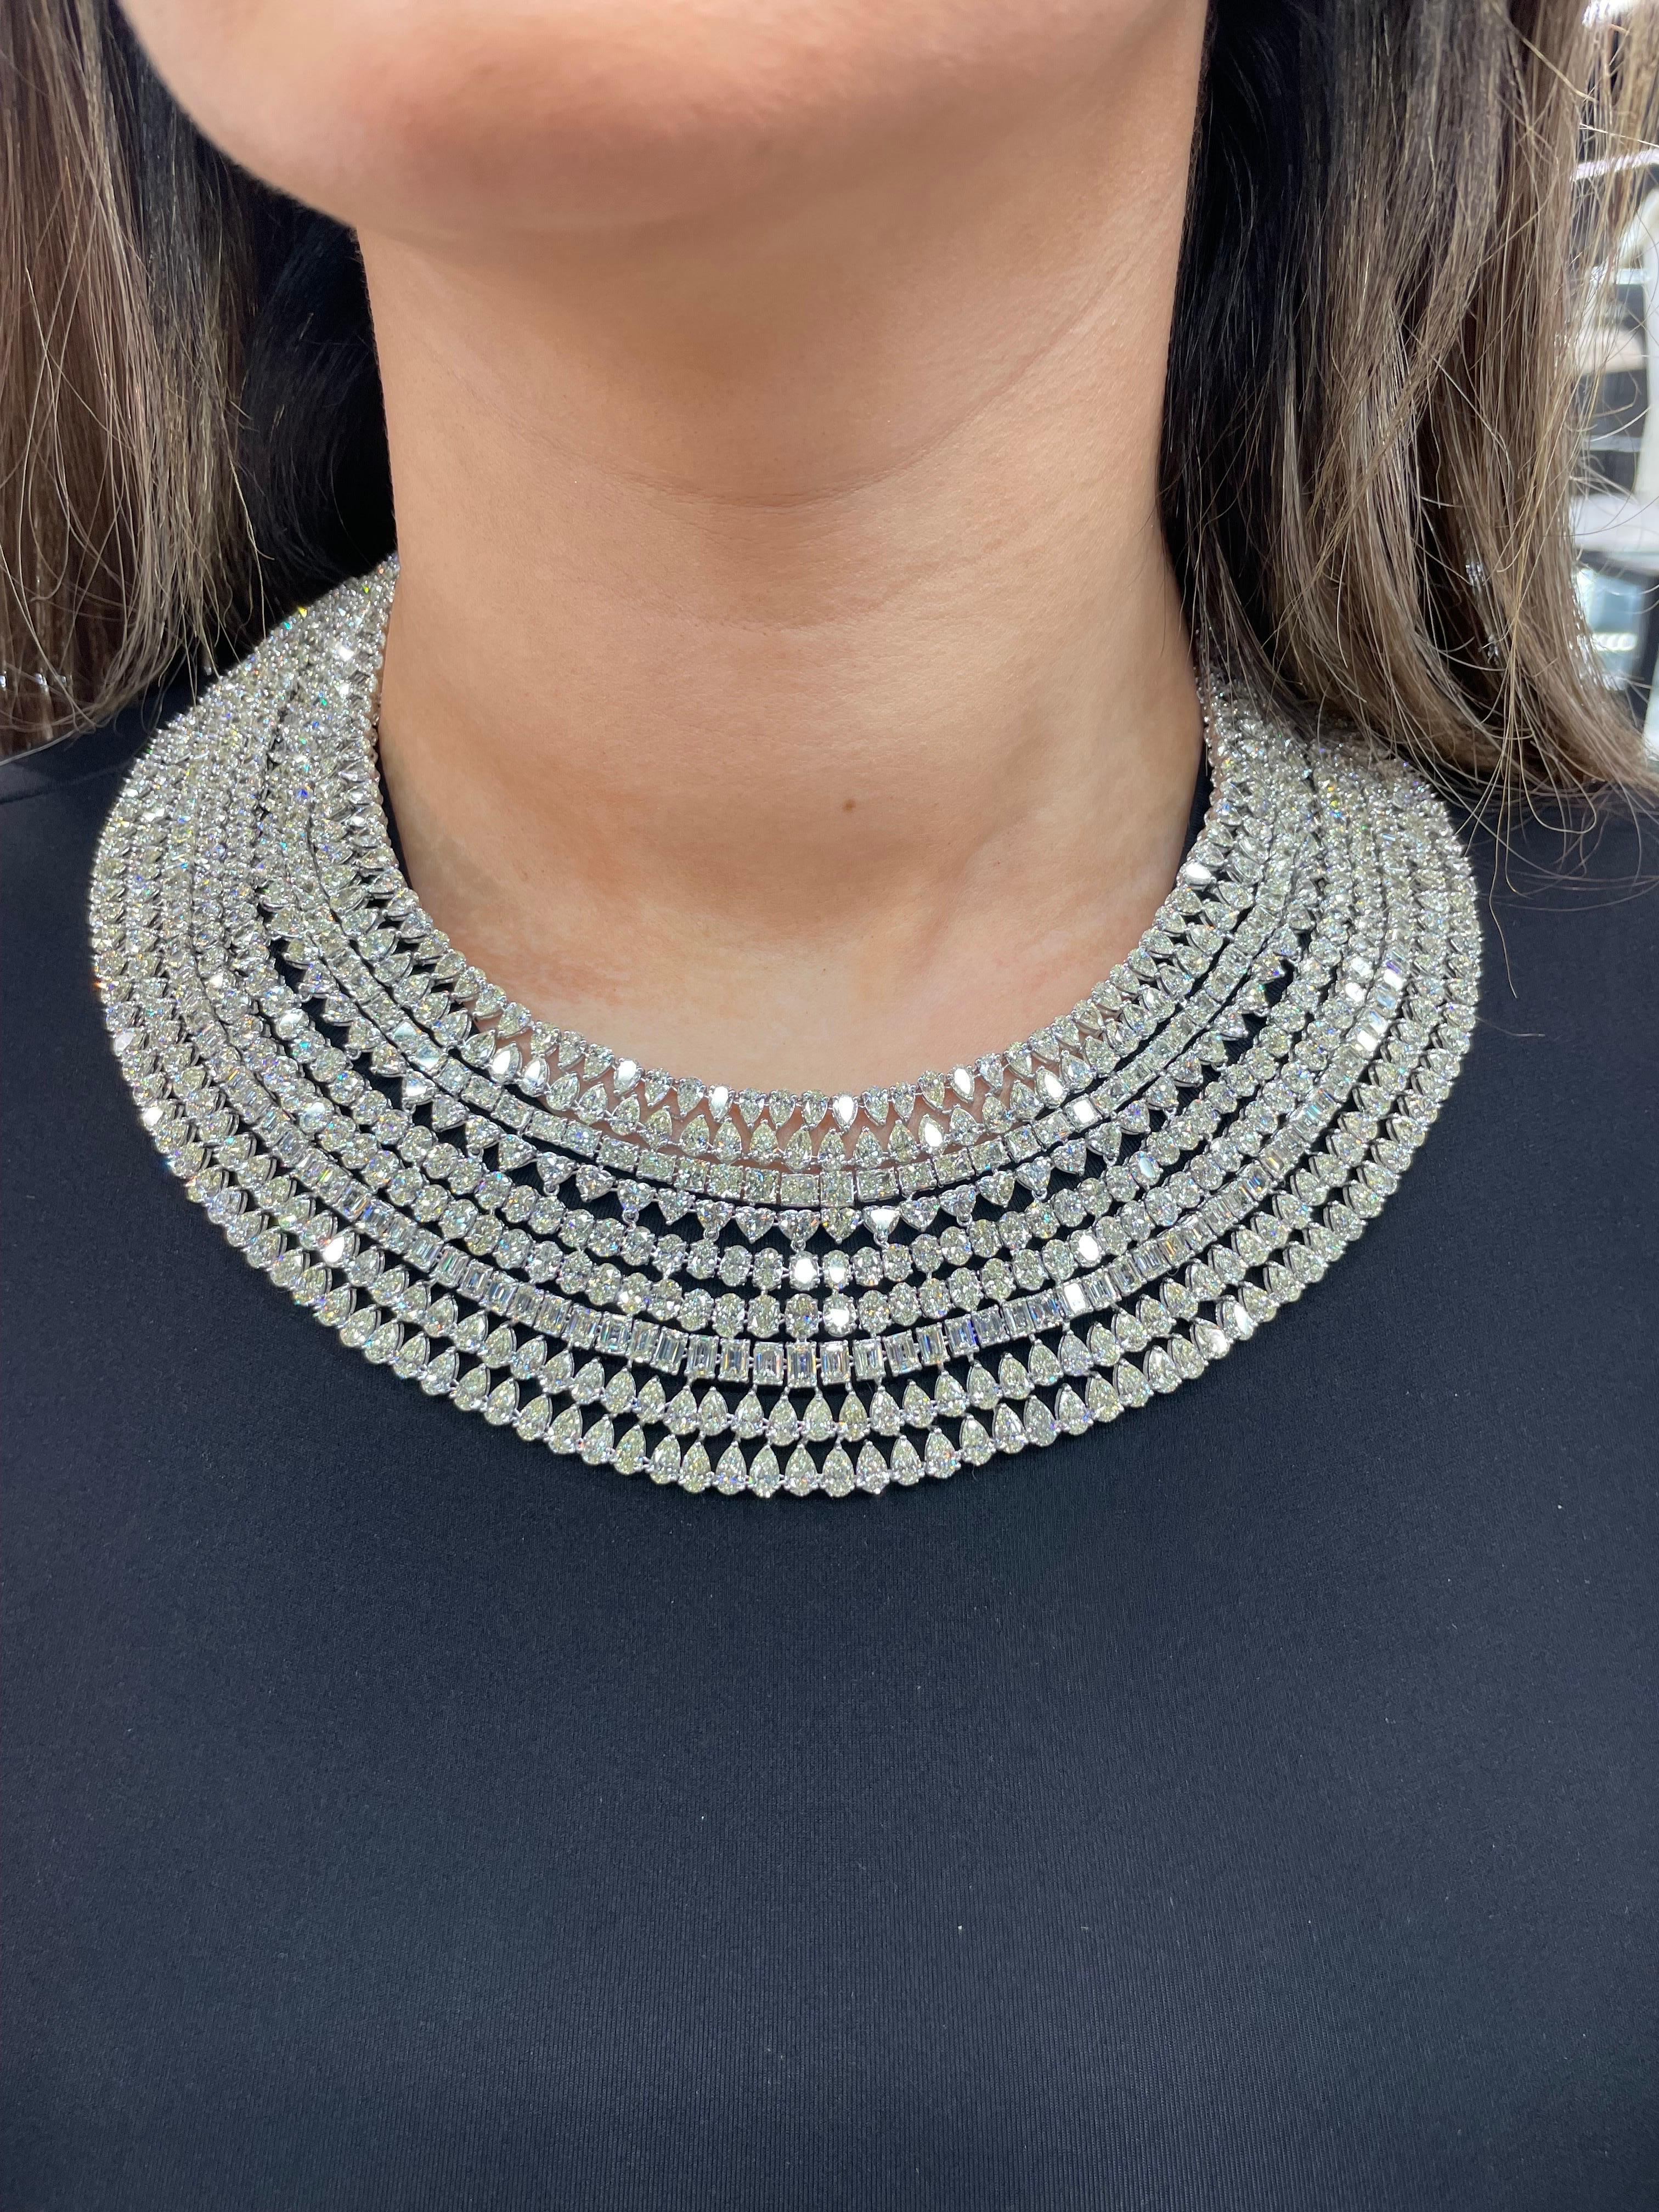 One oversized diamond bib necklace featuring numerous rows of Pear, Radiant, Heart, Oval and Emerald Cut Diamonds weighing an astounding 265 Carats, crafted in 18 Karat White Gold. 
Nicely matched diamonds of J-L Color
Comfortable on the neck.

DM